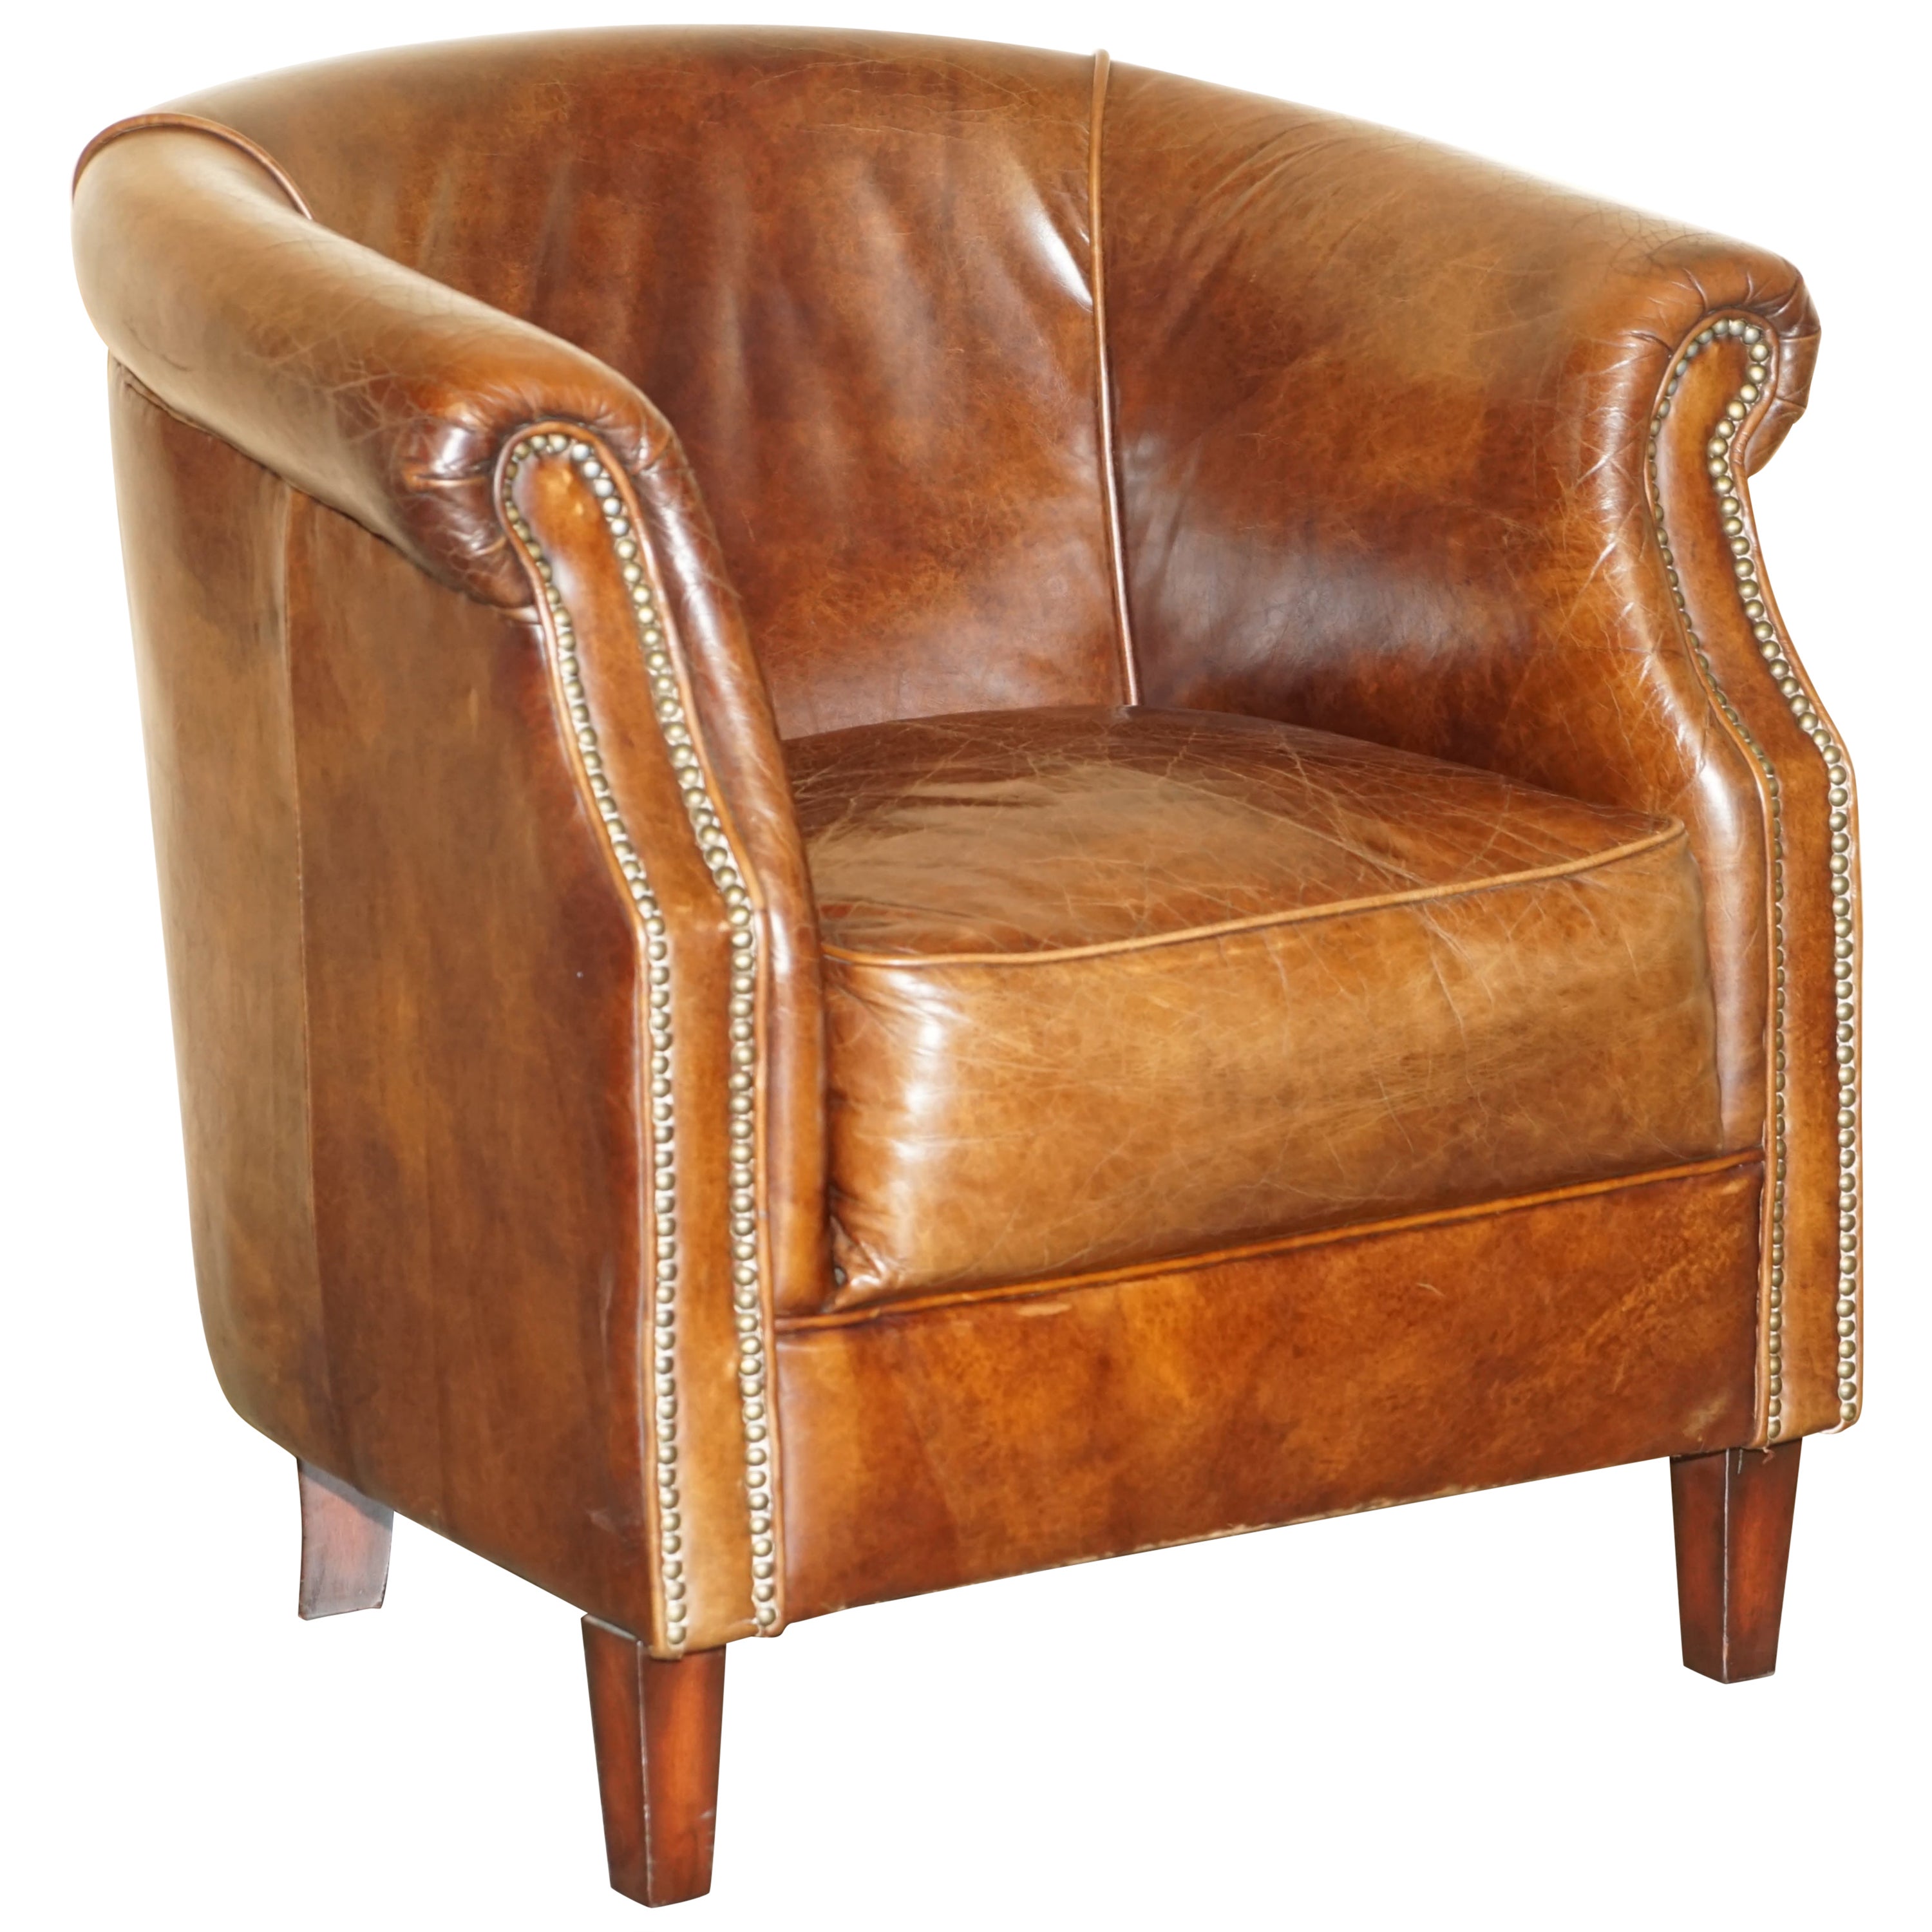 AGED HERiTAGE BROWN LEATHER BIKER TAN CLUB TUB ARMCHAIR MUST SEE LOVELY PATINa!! For Sale